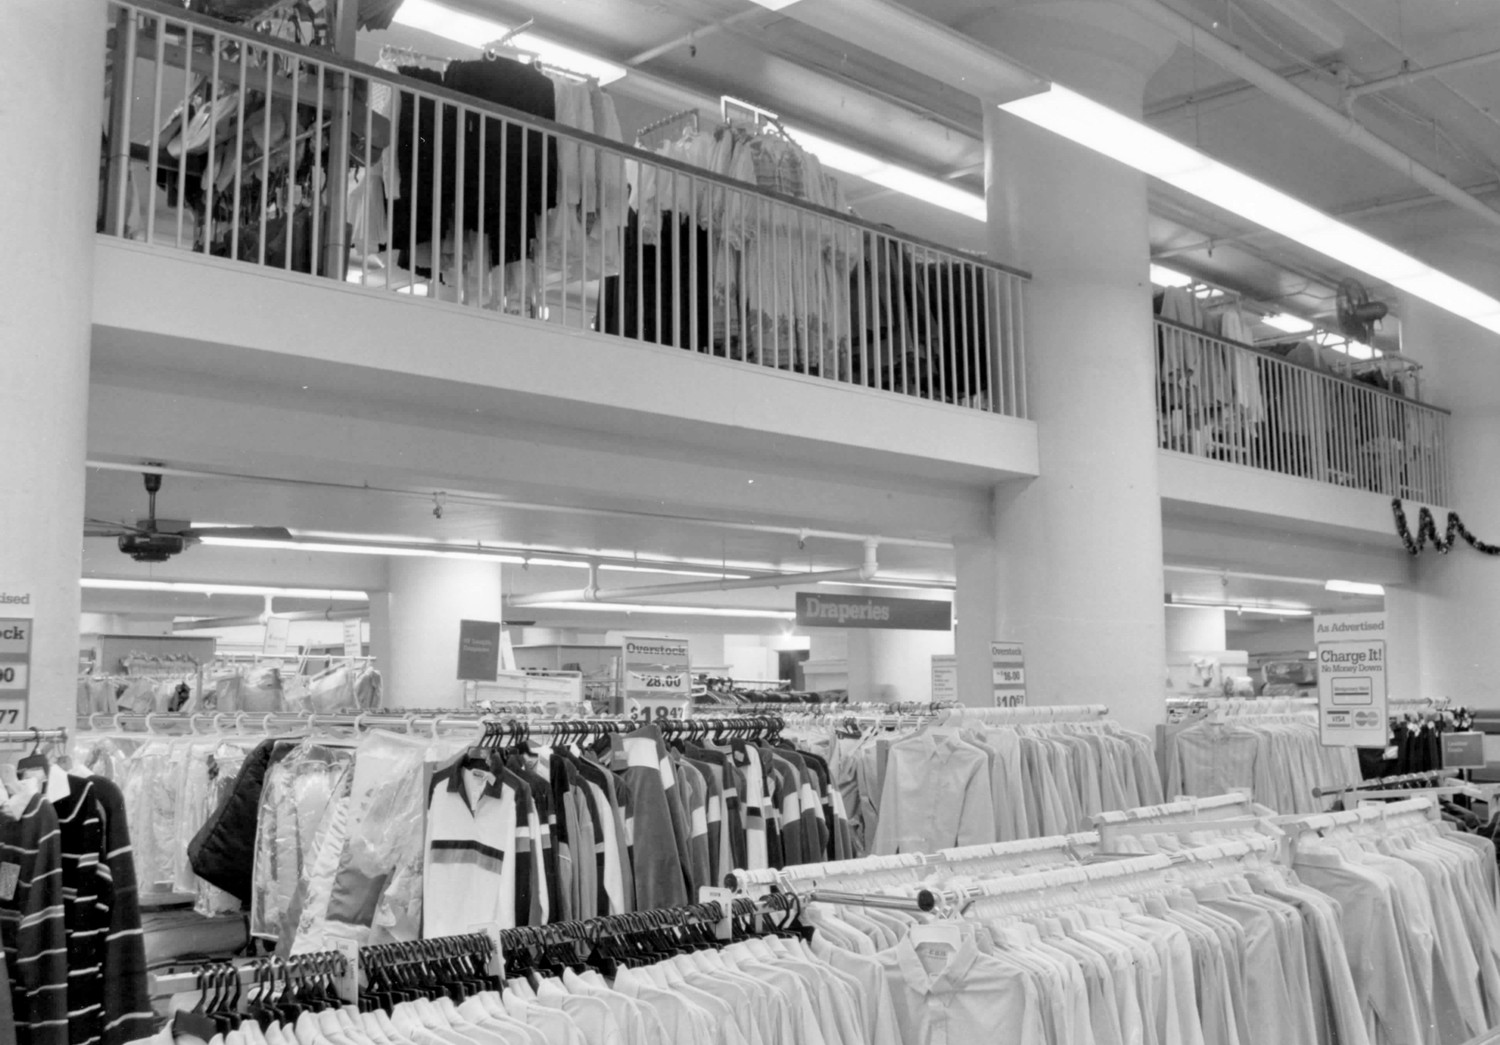 Montgomery Ward & Company Warehouse and Store, Portland Oregon First floor and mezzanine retail space (1984)